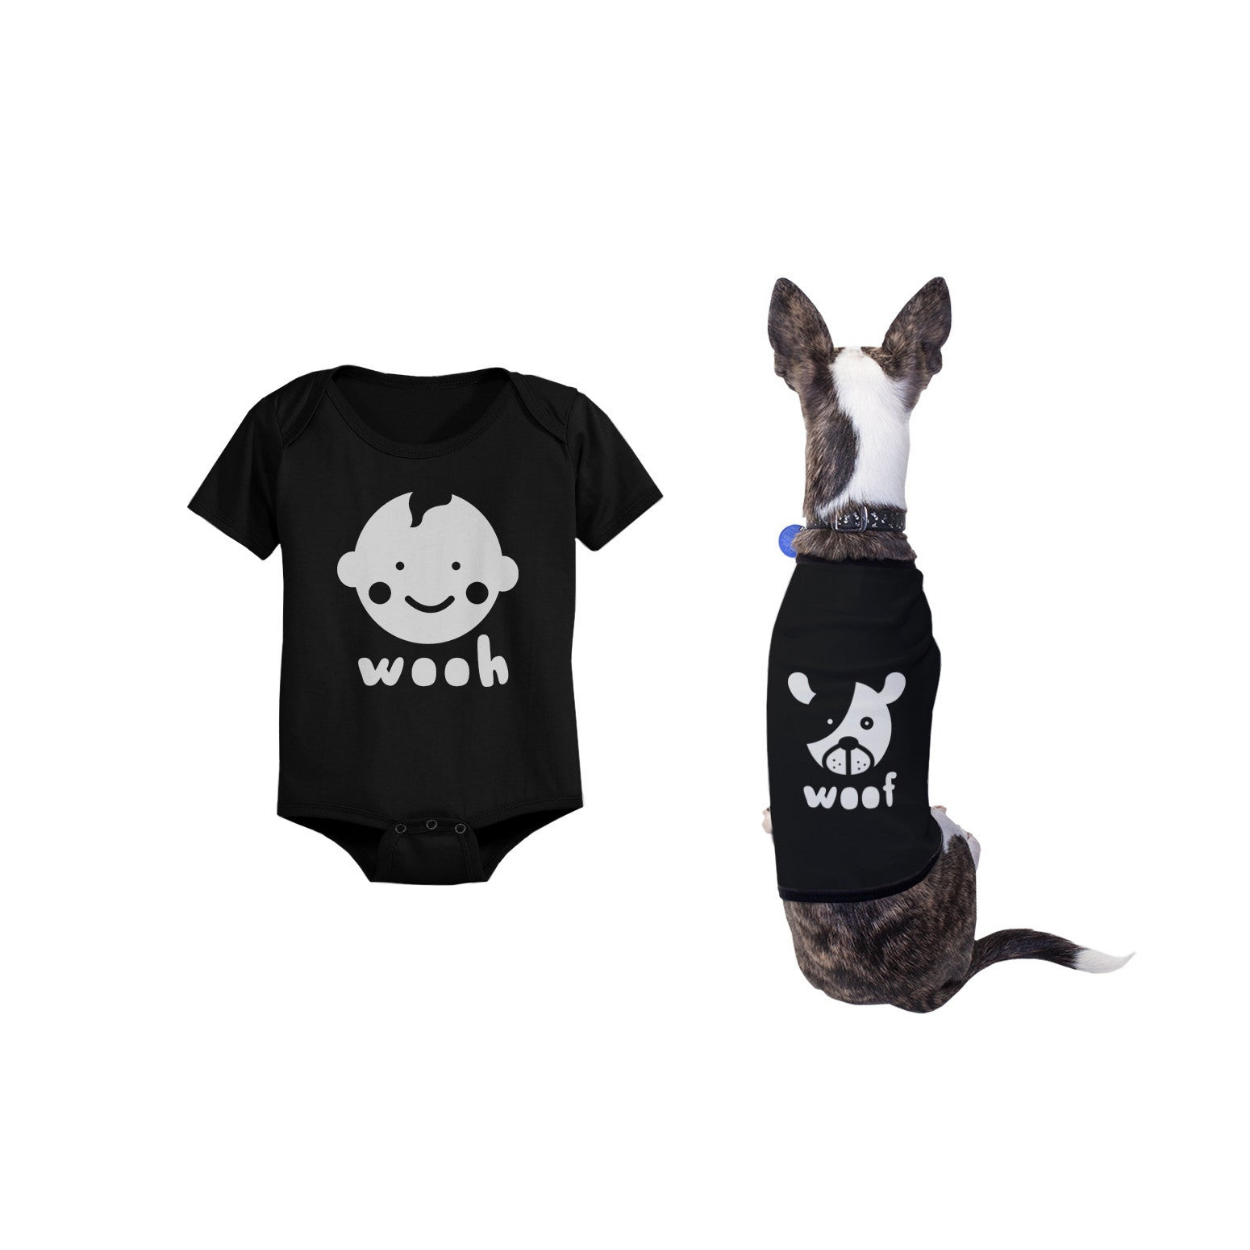 Wooh Baby Bodysuits And Woof Dog Tshirts Cute Matching Pet And Infant Apparel - 365 In Love